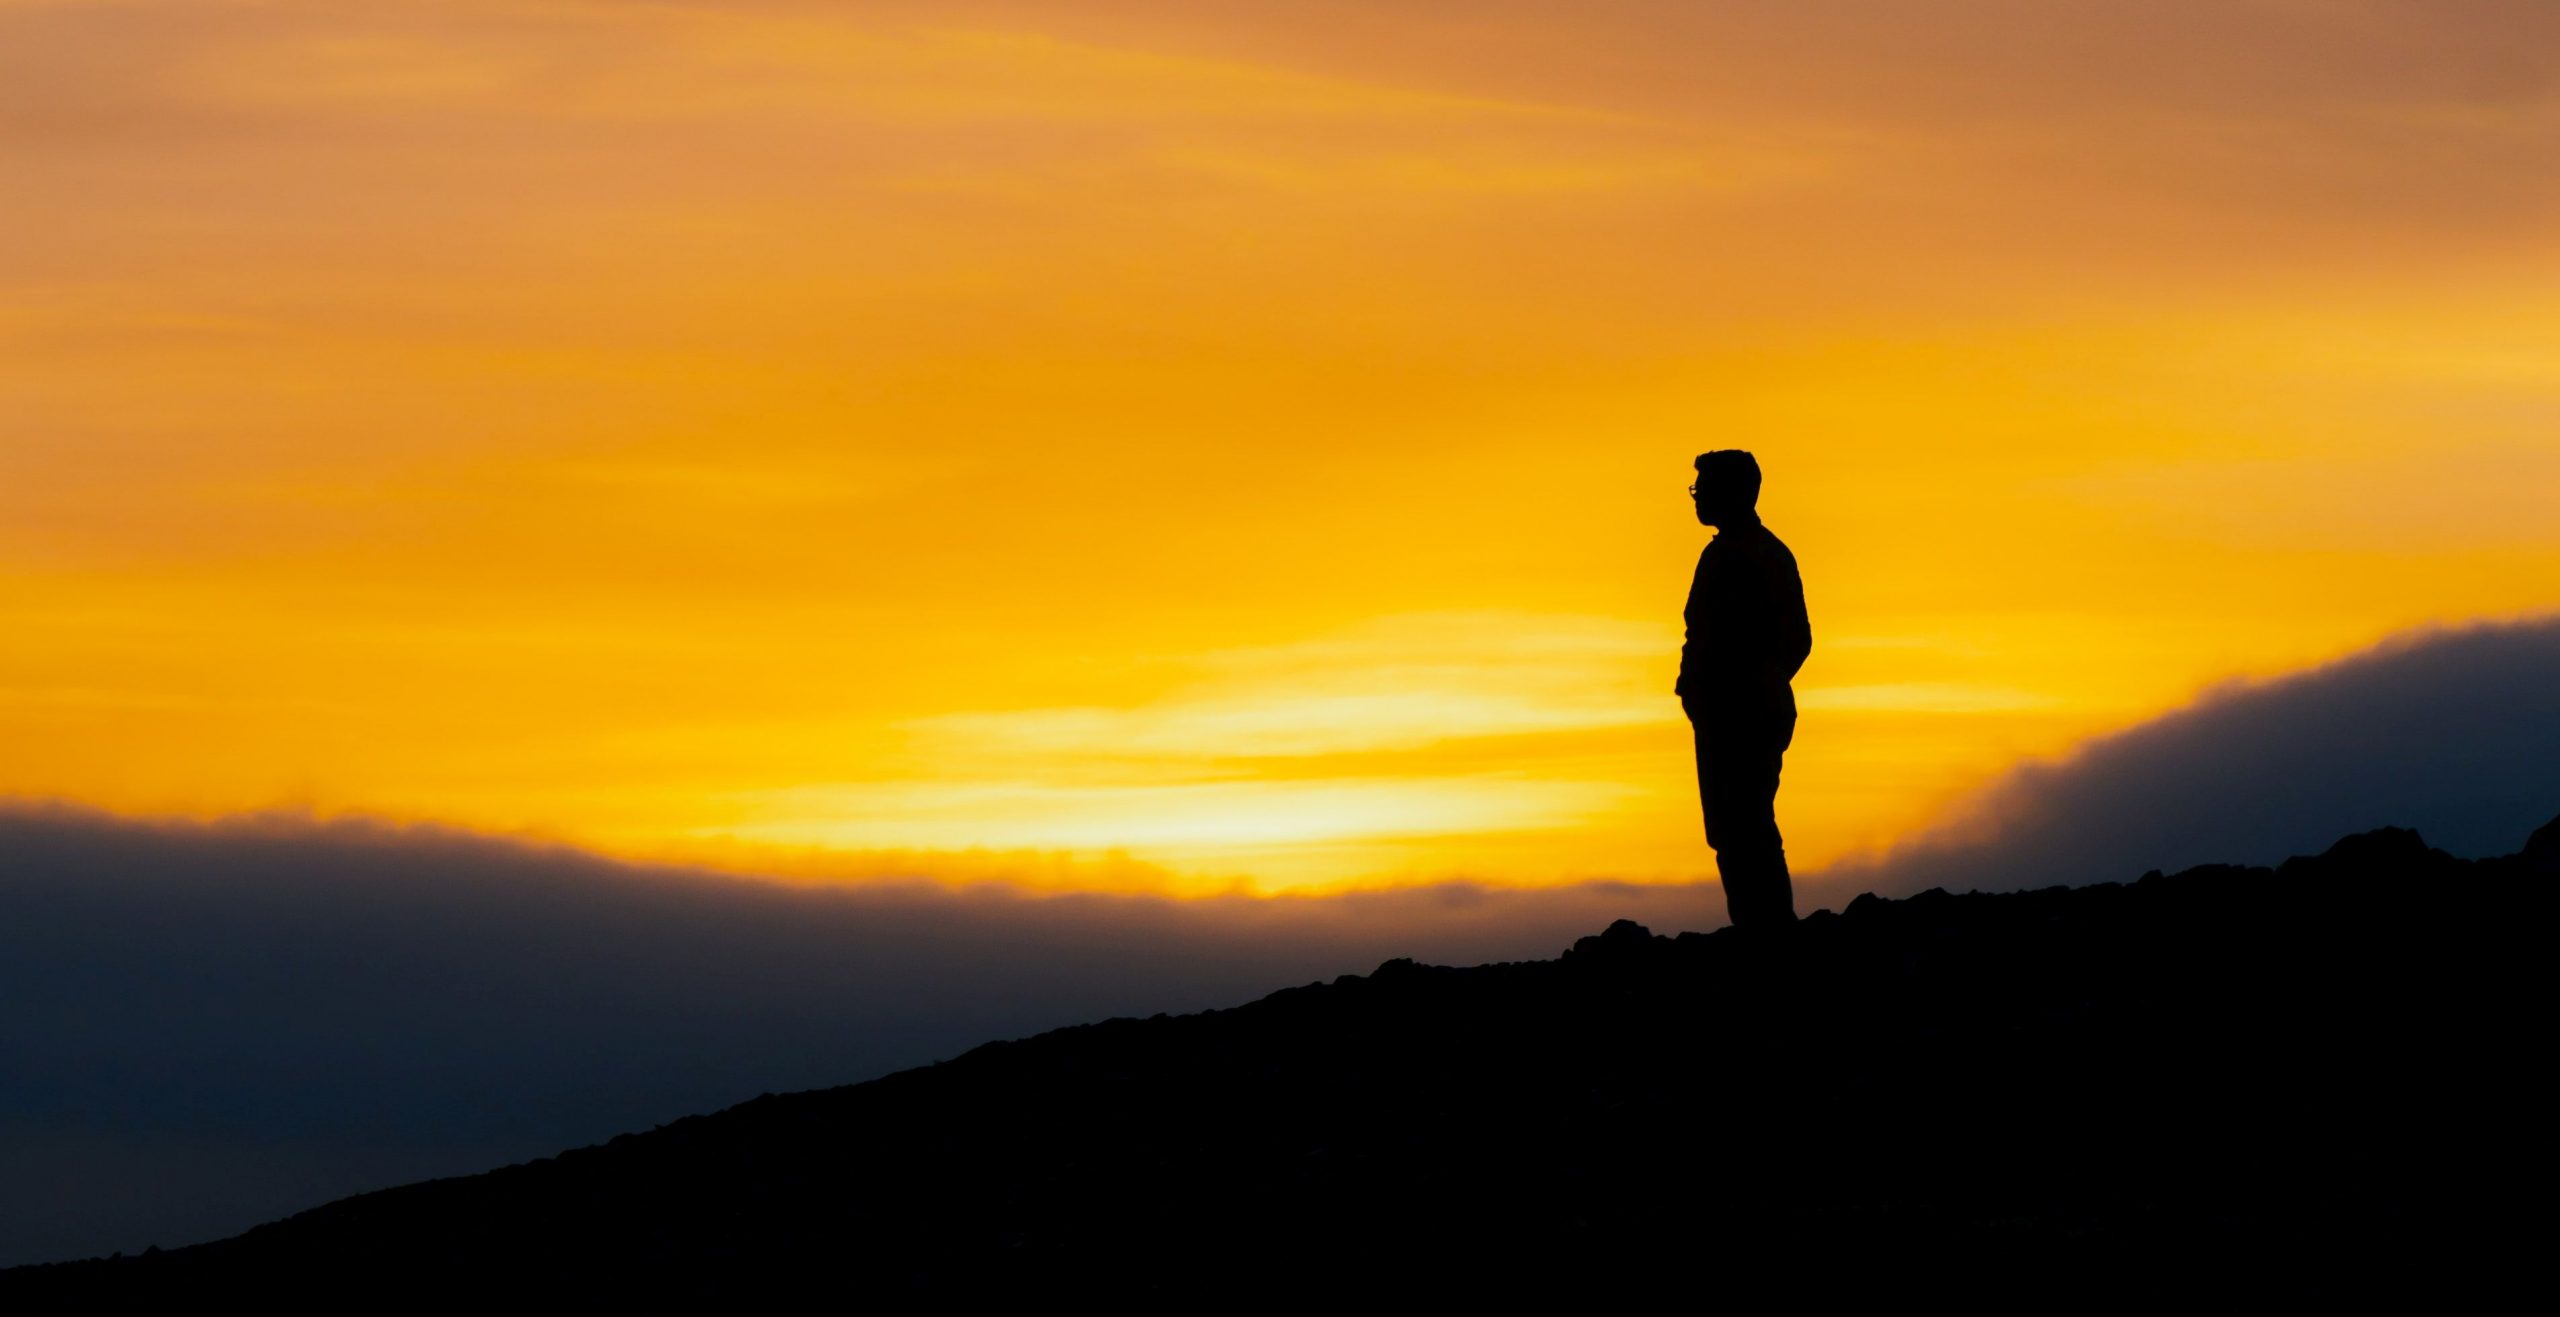 Silhouette of a man standing against a sunset backdrop.